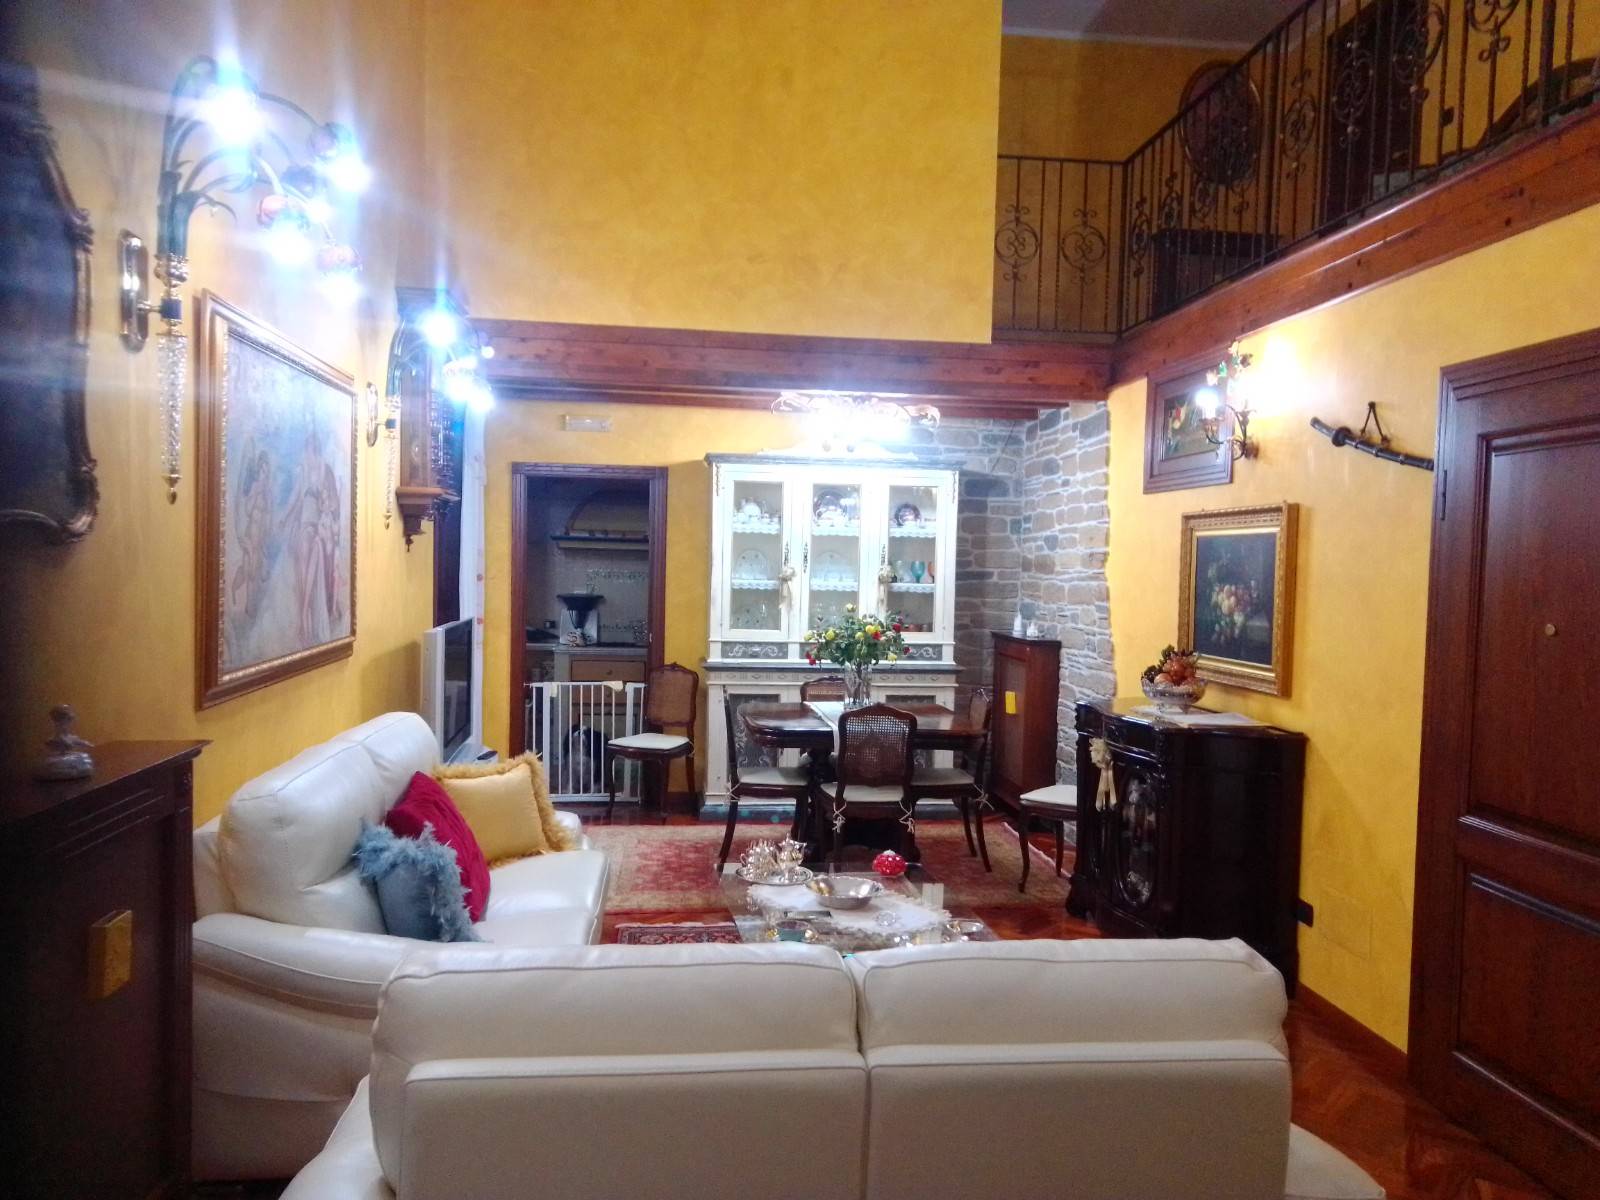 CENTRO, LICATA, Apartment for sale, Excellent Condition, Heating Individual heating system, Energetic class: G, composed by: 5 Rooms, Little kitchen, 